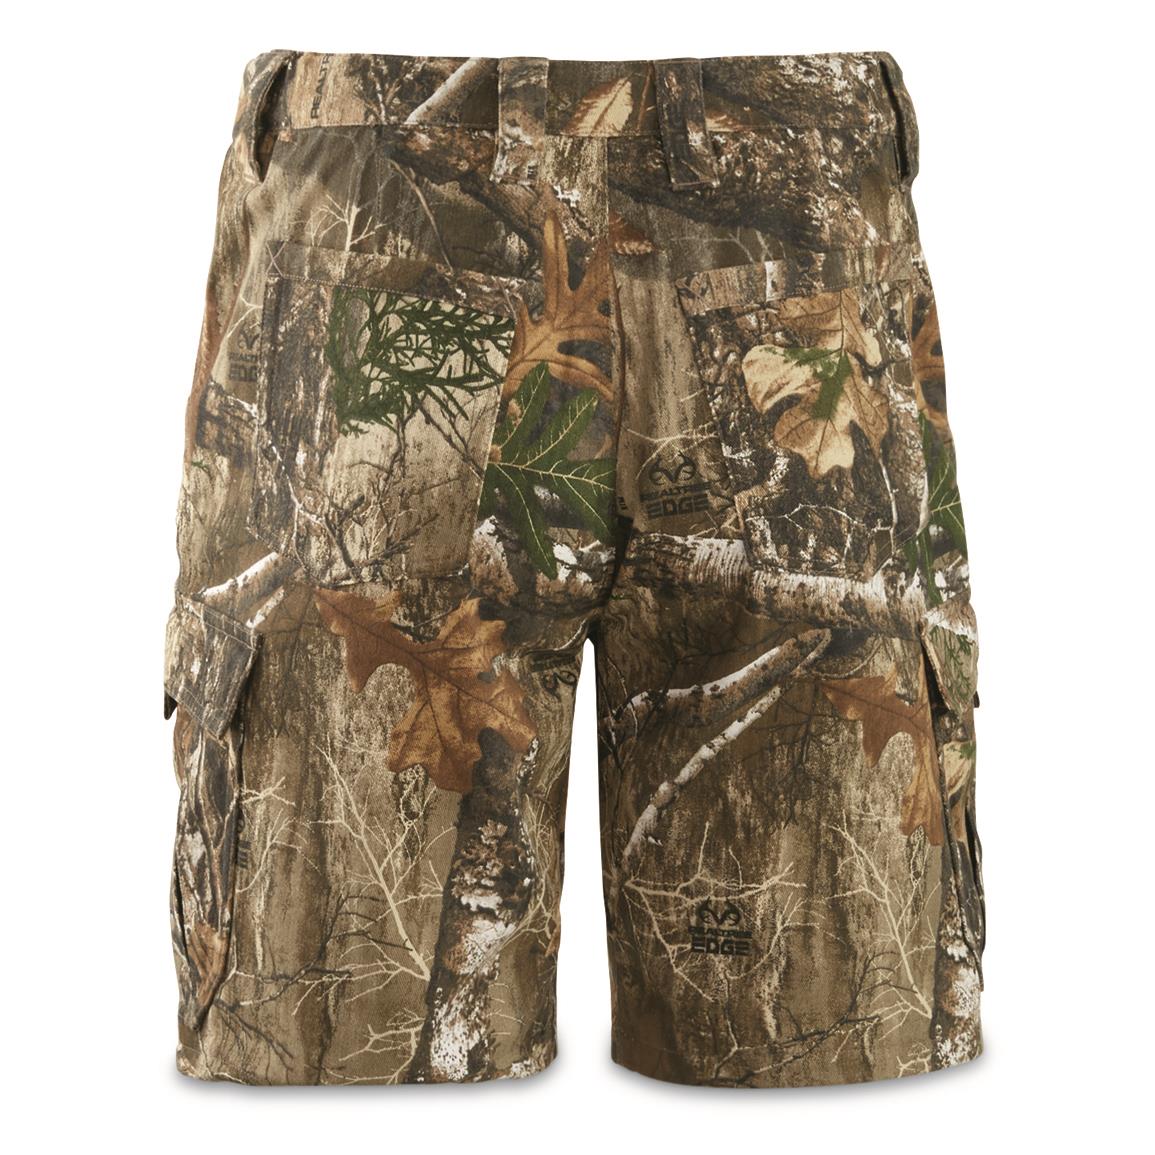 GUIDE GEAR Shorts, Men's Clothing & Outerwear